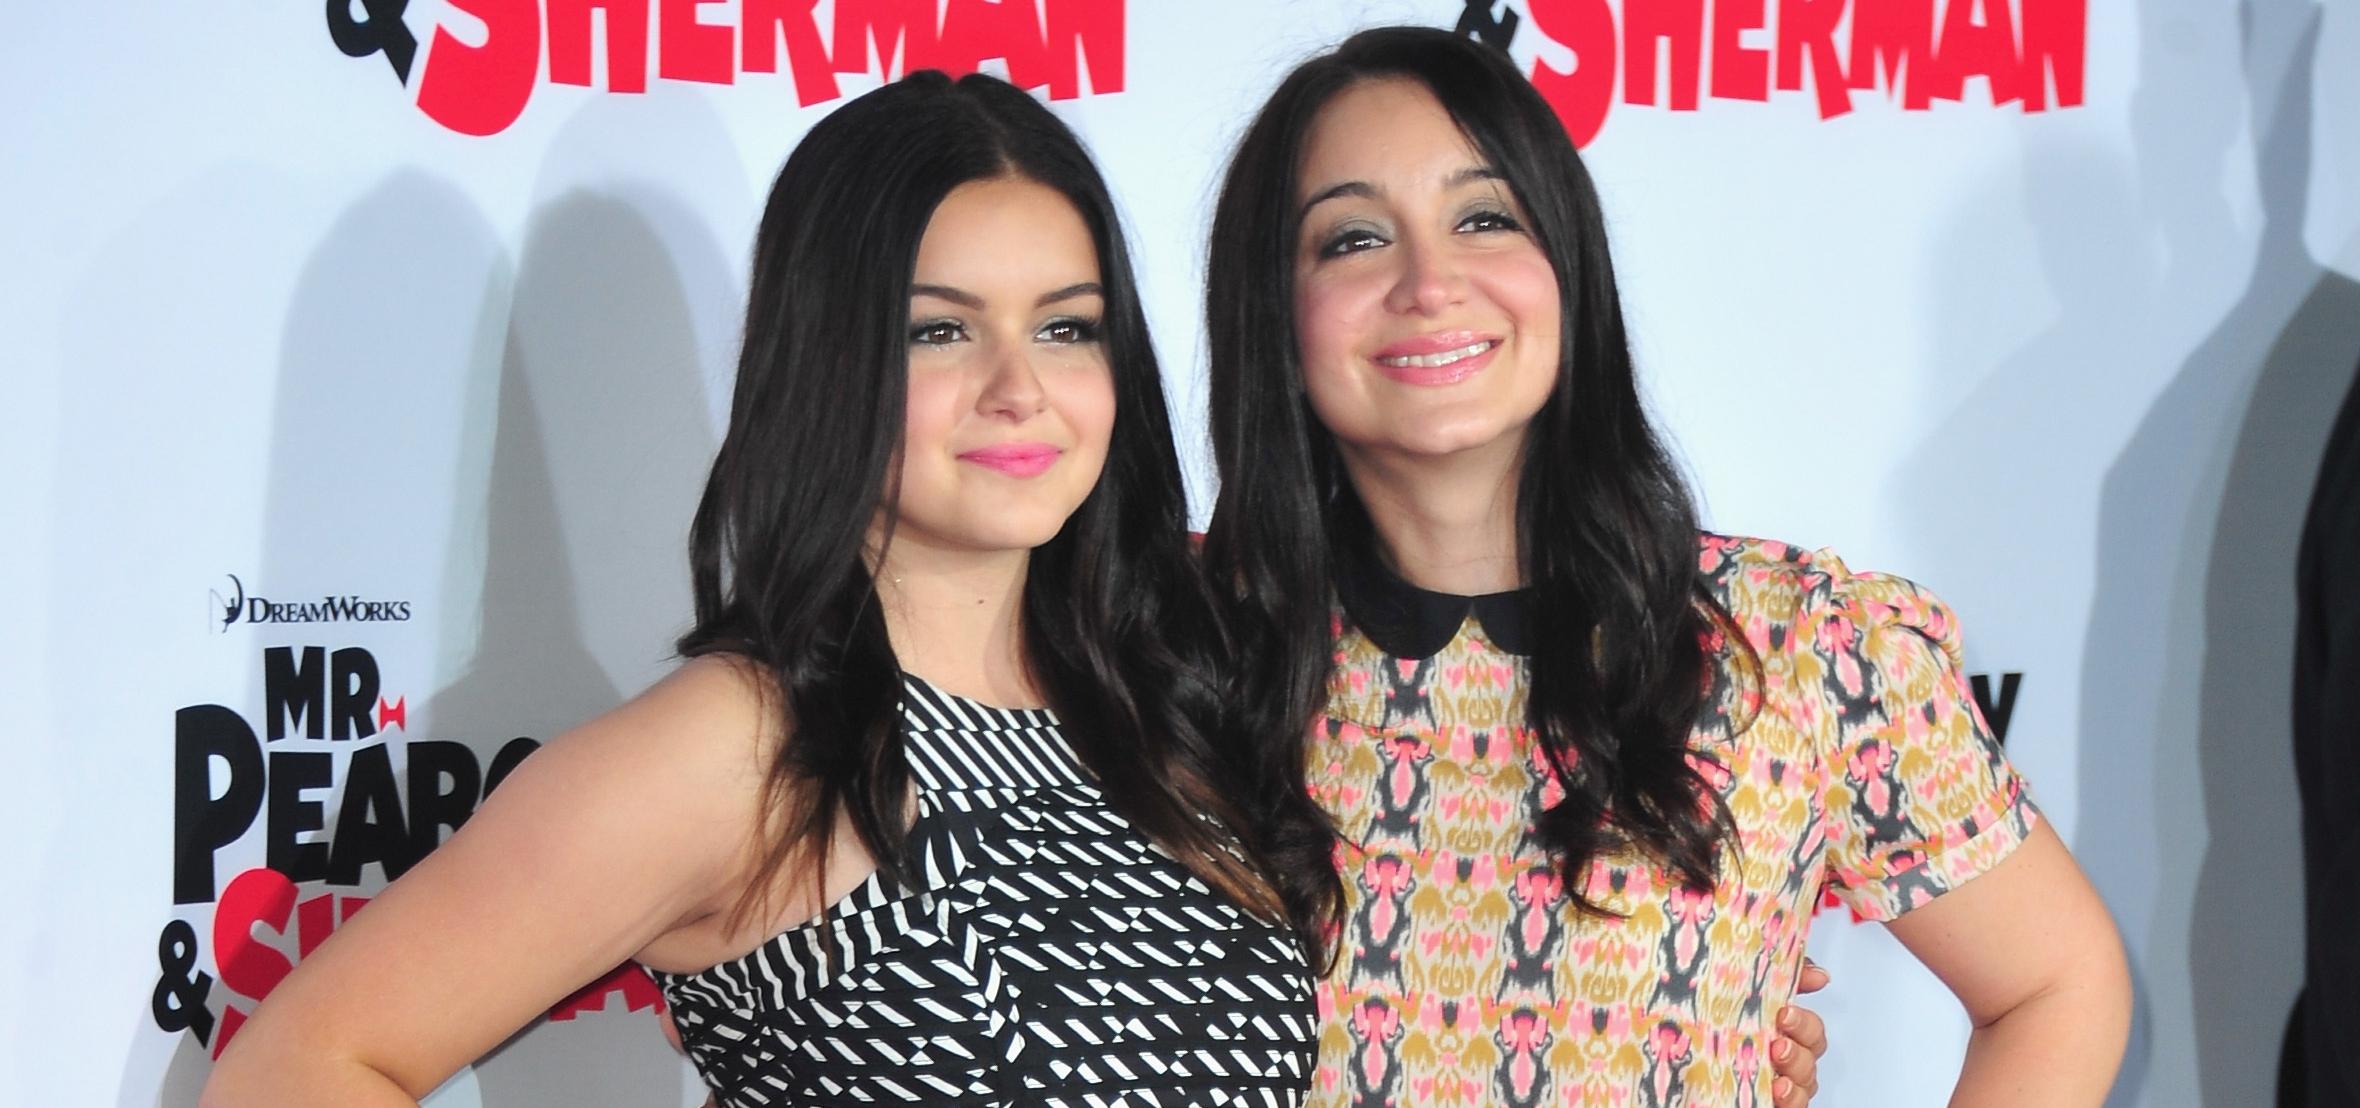 Ariel Winter and sister Shanelle Workman arrive at the Premiere of "Mr. Peabody & Sherman" March 5, 2014